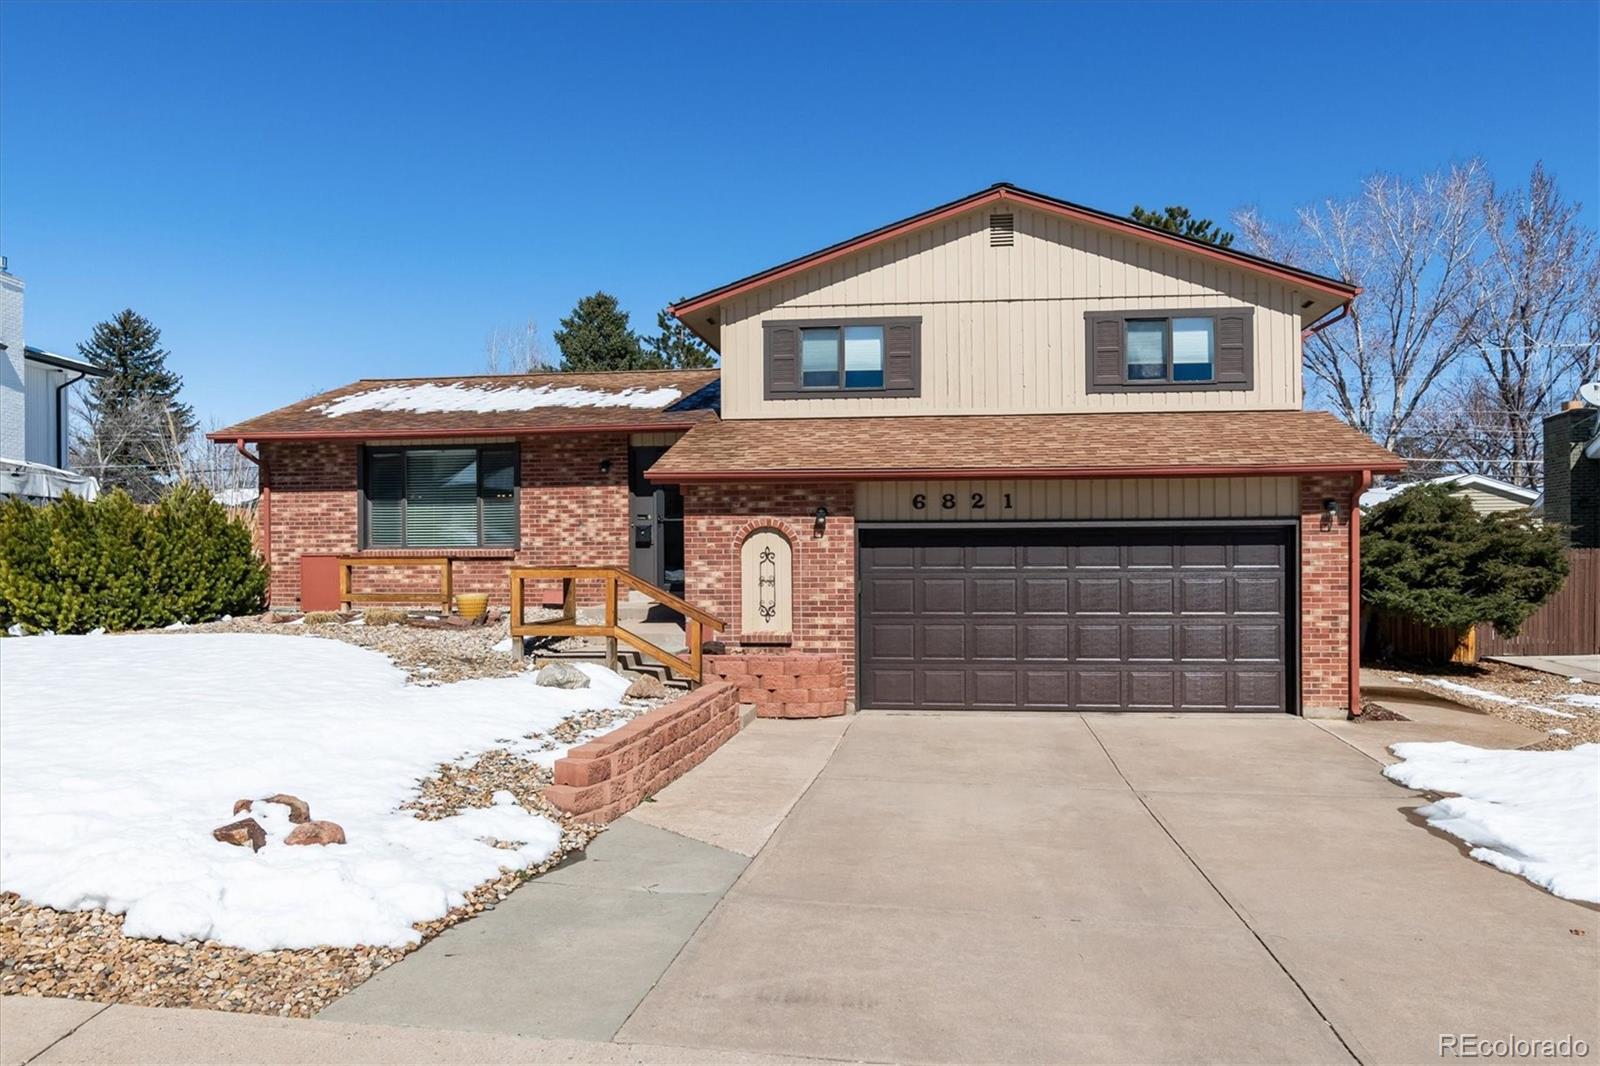 6821 S Clermont Drive, centennial MLS: 5418511 Beds: 4 Baths: 3 Price: $624,900